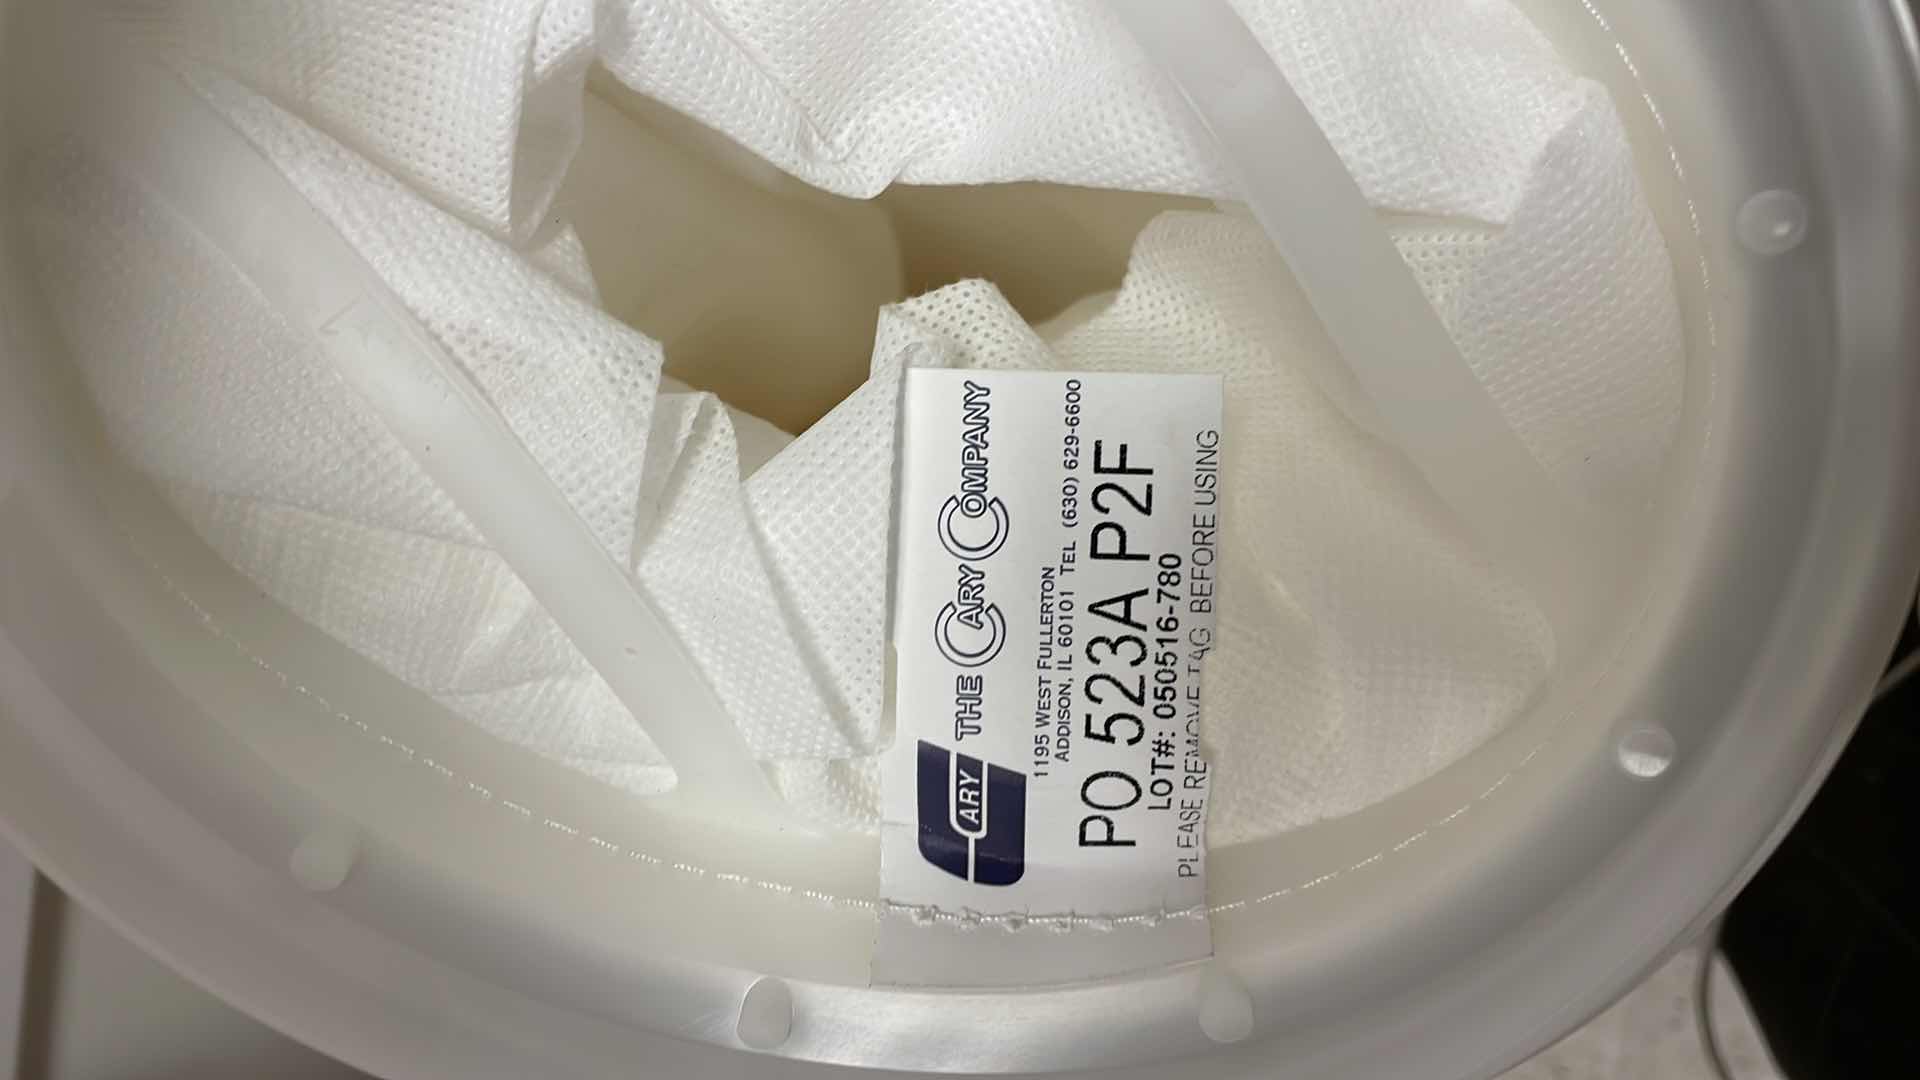 Photo 3 of THE CARY COMPANY PO 523A P2F LOT#: 050516-780 PART#21W3M3 LIQUID FILTER BAGS (12)